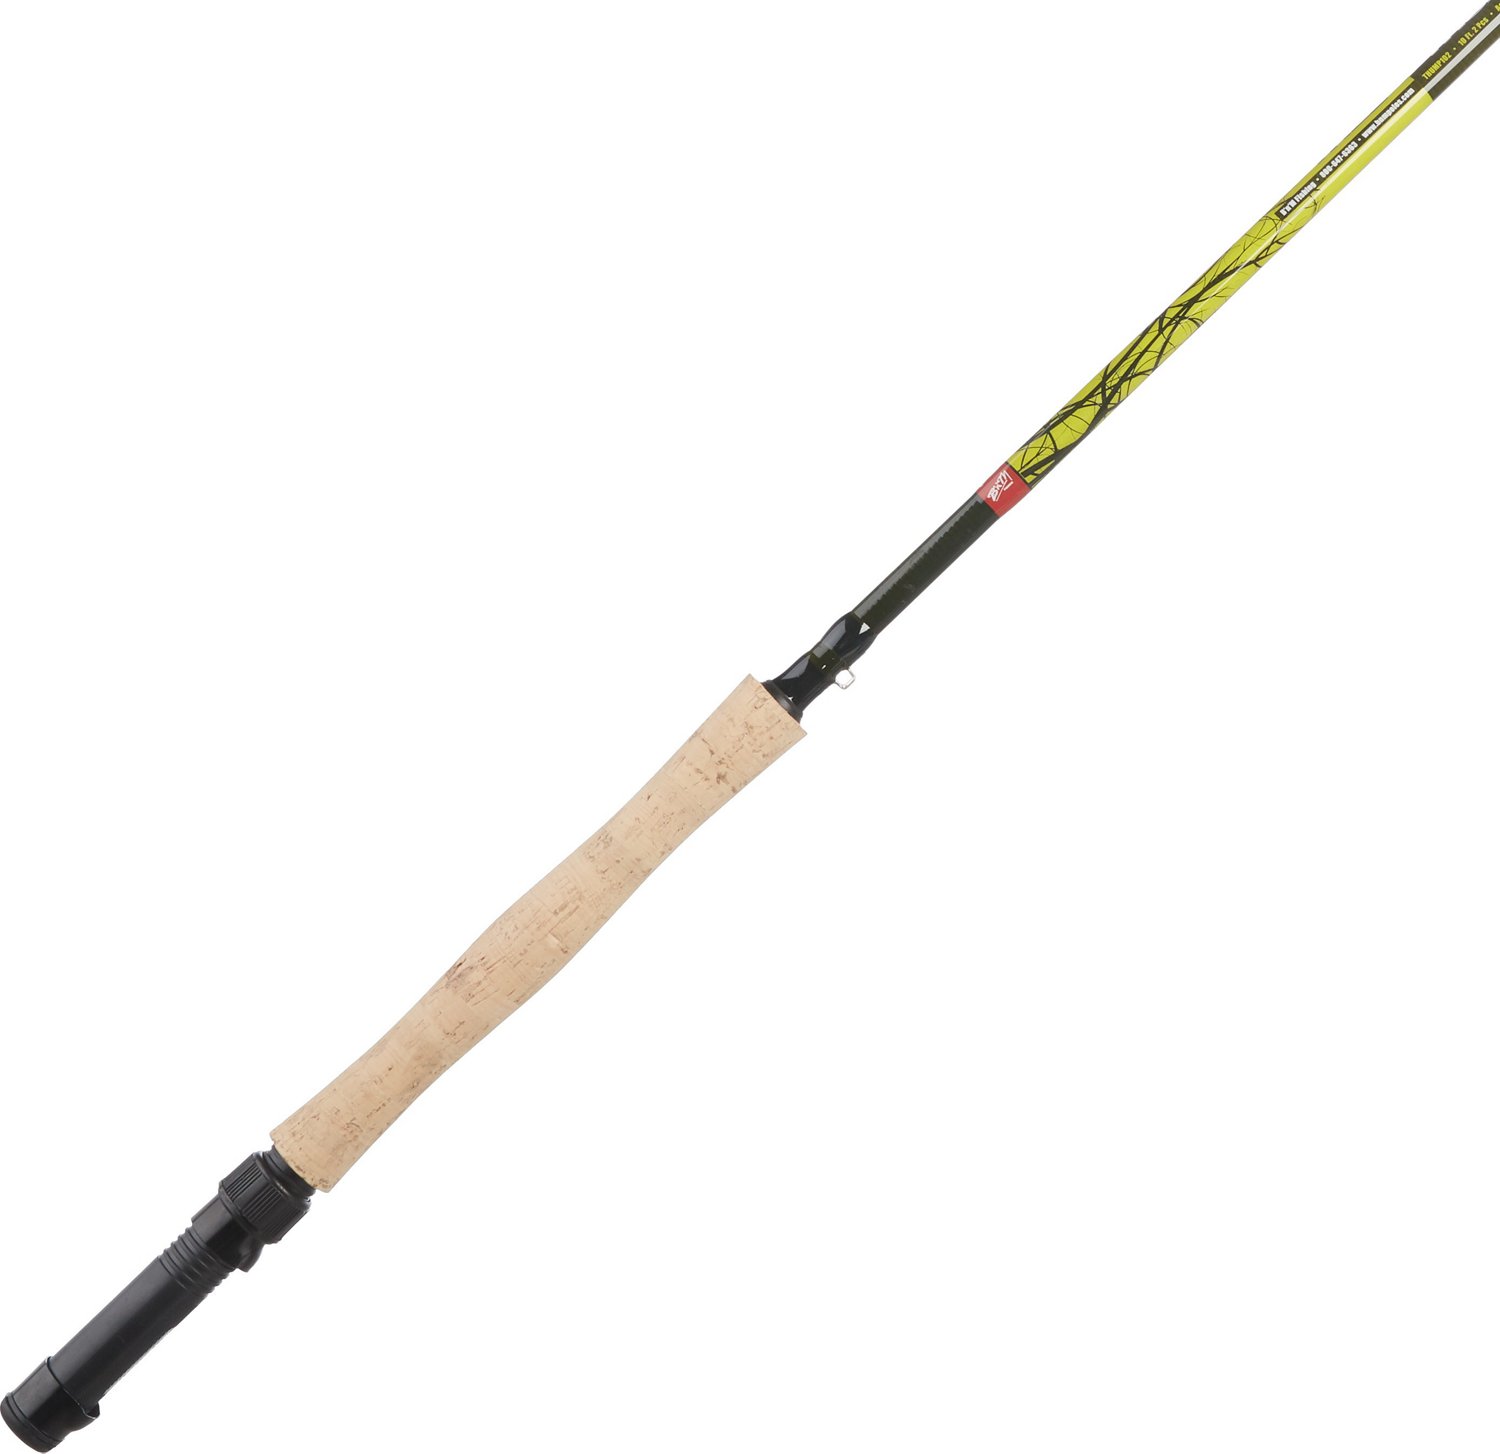 Academy Sports + Outdoors B 'n' M Tree Thumper Crappie Jig Rod